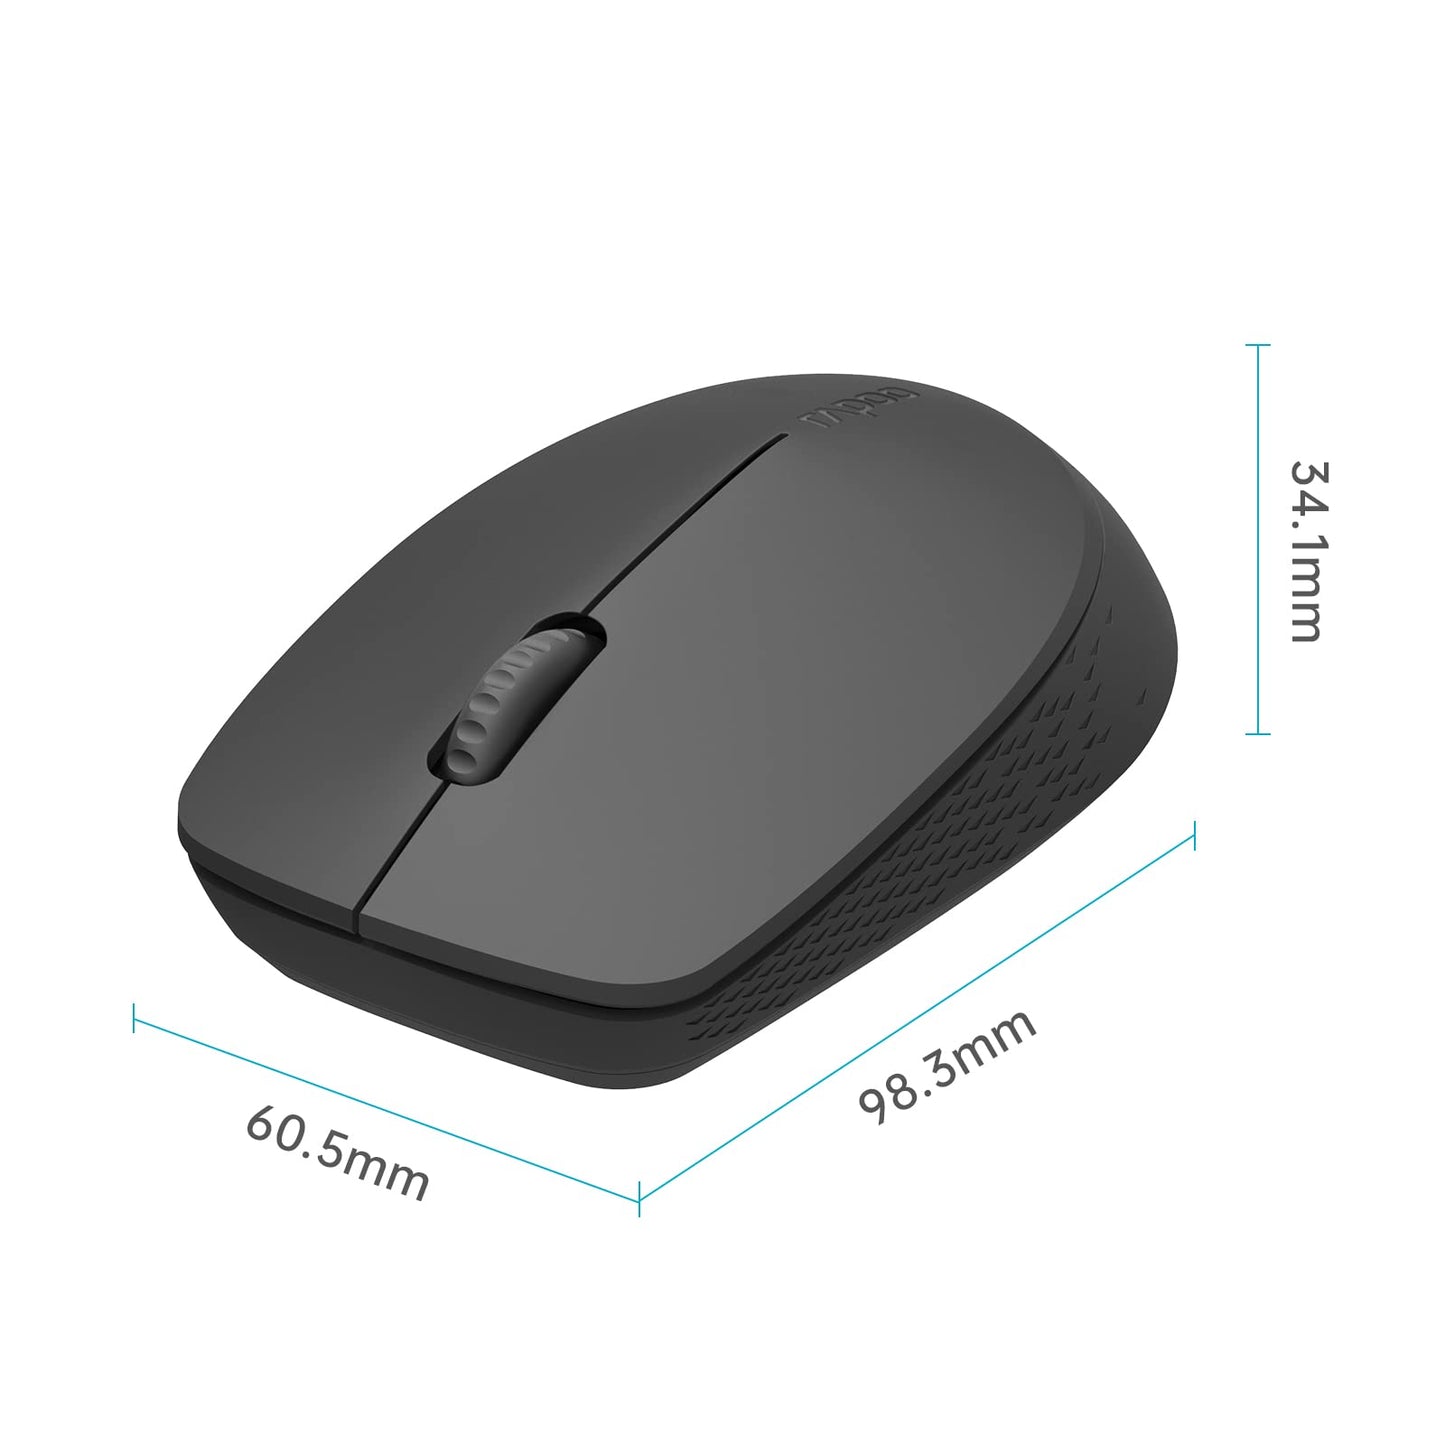 RAPOO Multi-Device Bluetooth Mouse, Connect Up to 3 Different Devices, Noiseless Ergonomic Design Comfortable Use, 9 Month Long Battery Life, for Computer Laptop MacBook Tablets Phones, Black